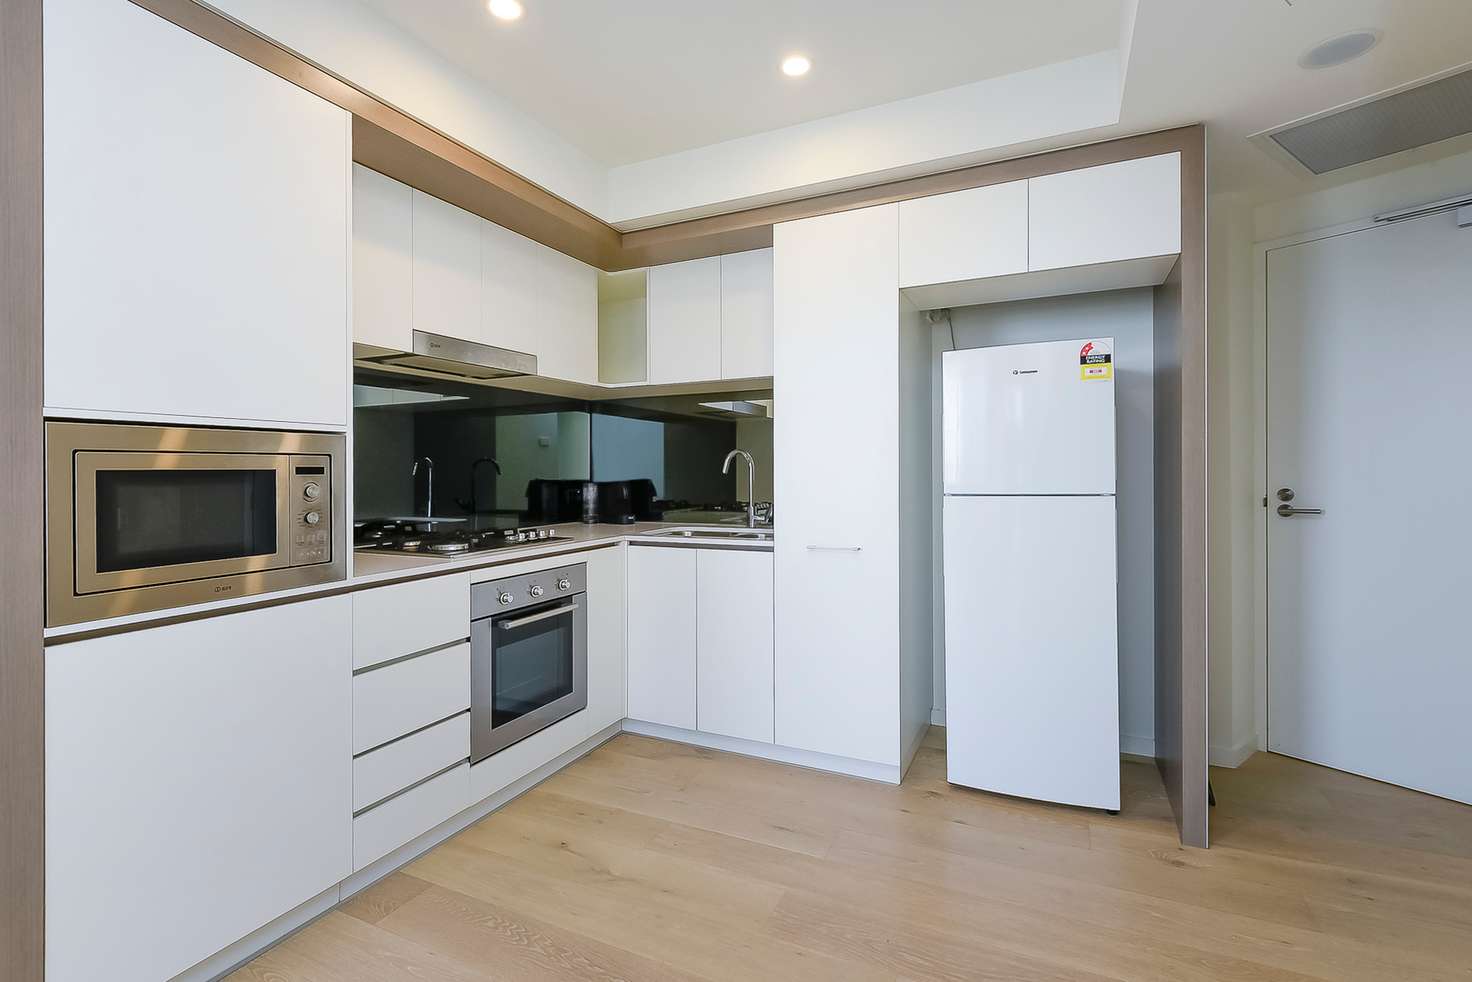 Main view of Homely apartment listing, 21403/23 Bouquet Street, South Brisbane QLD 4101